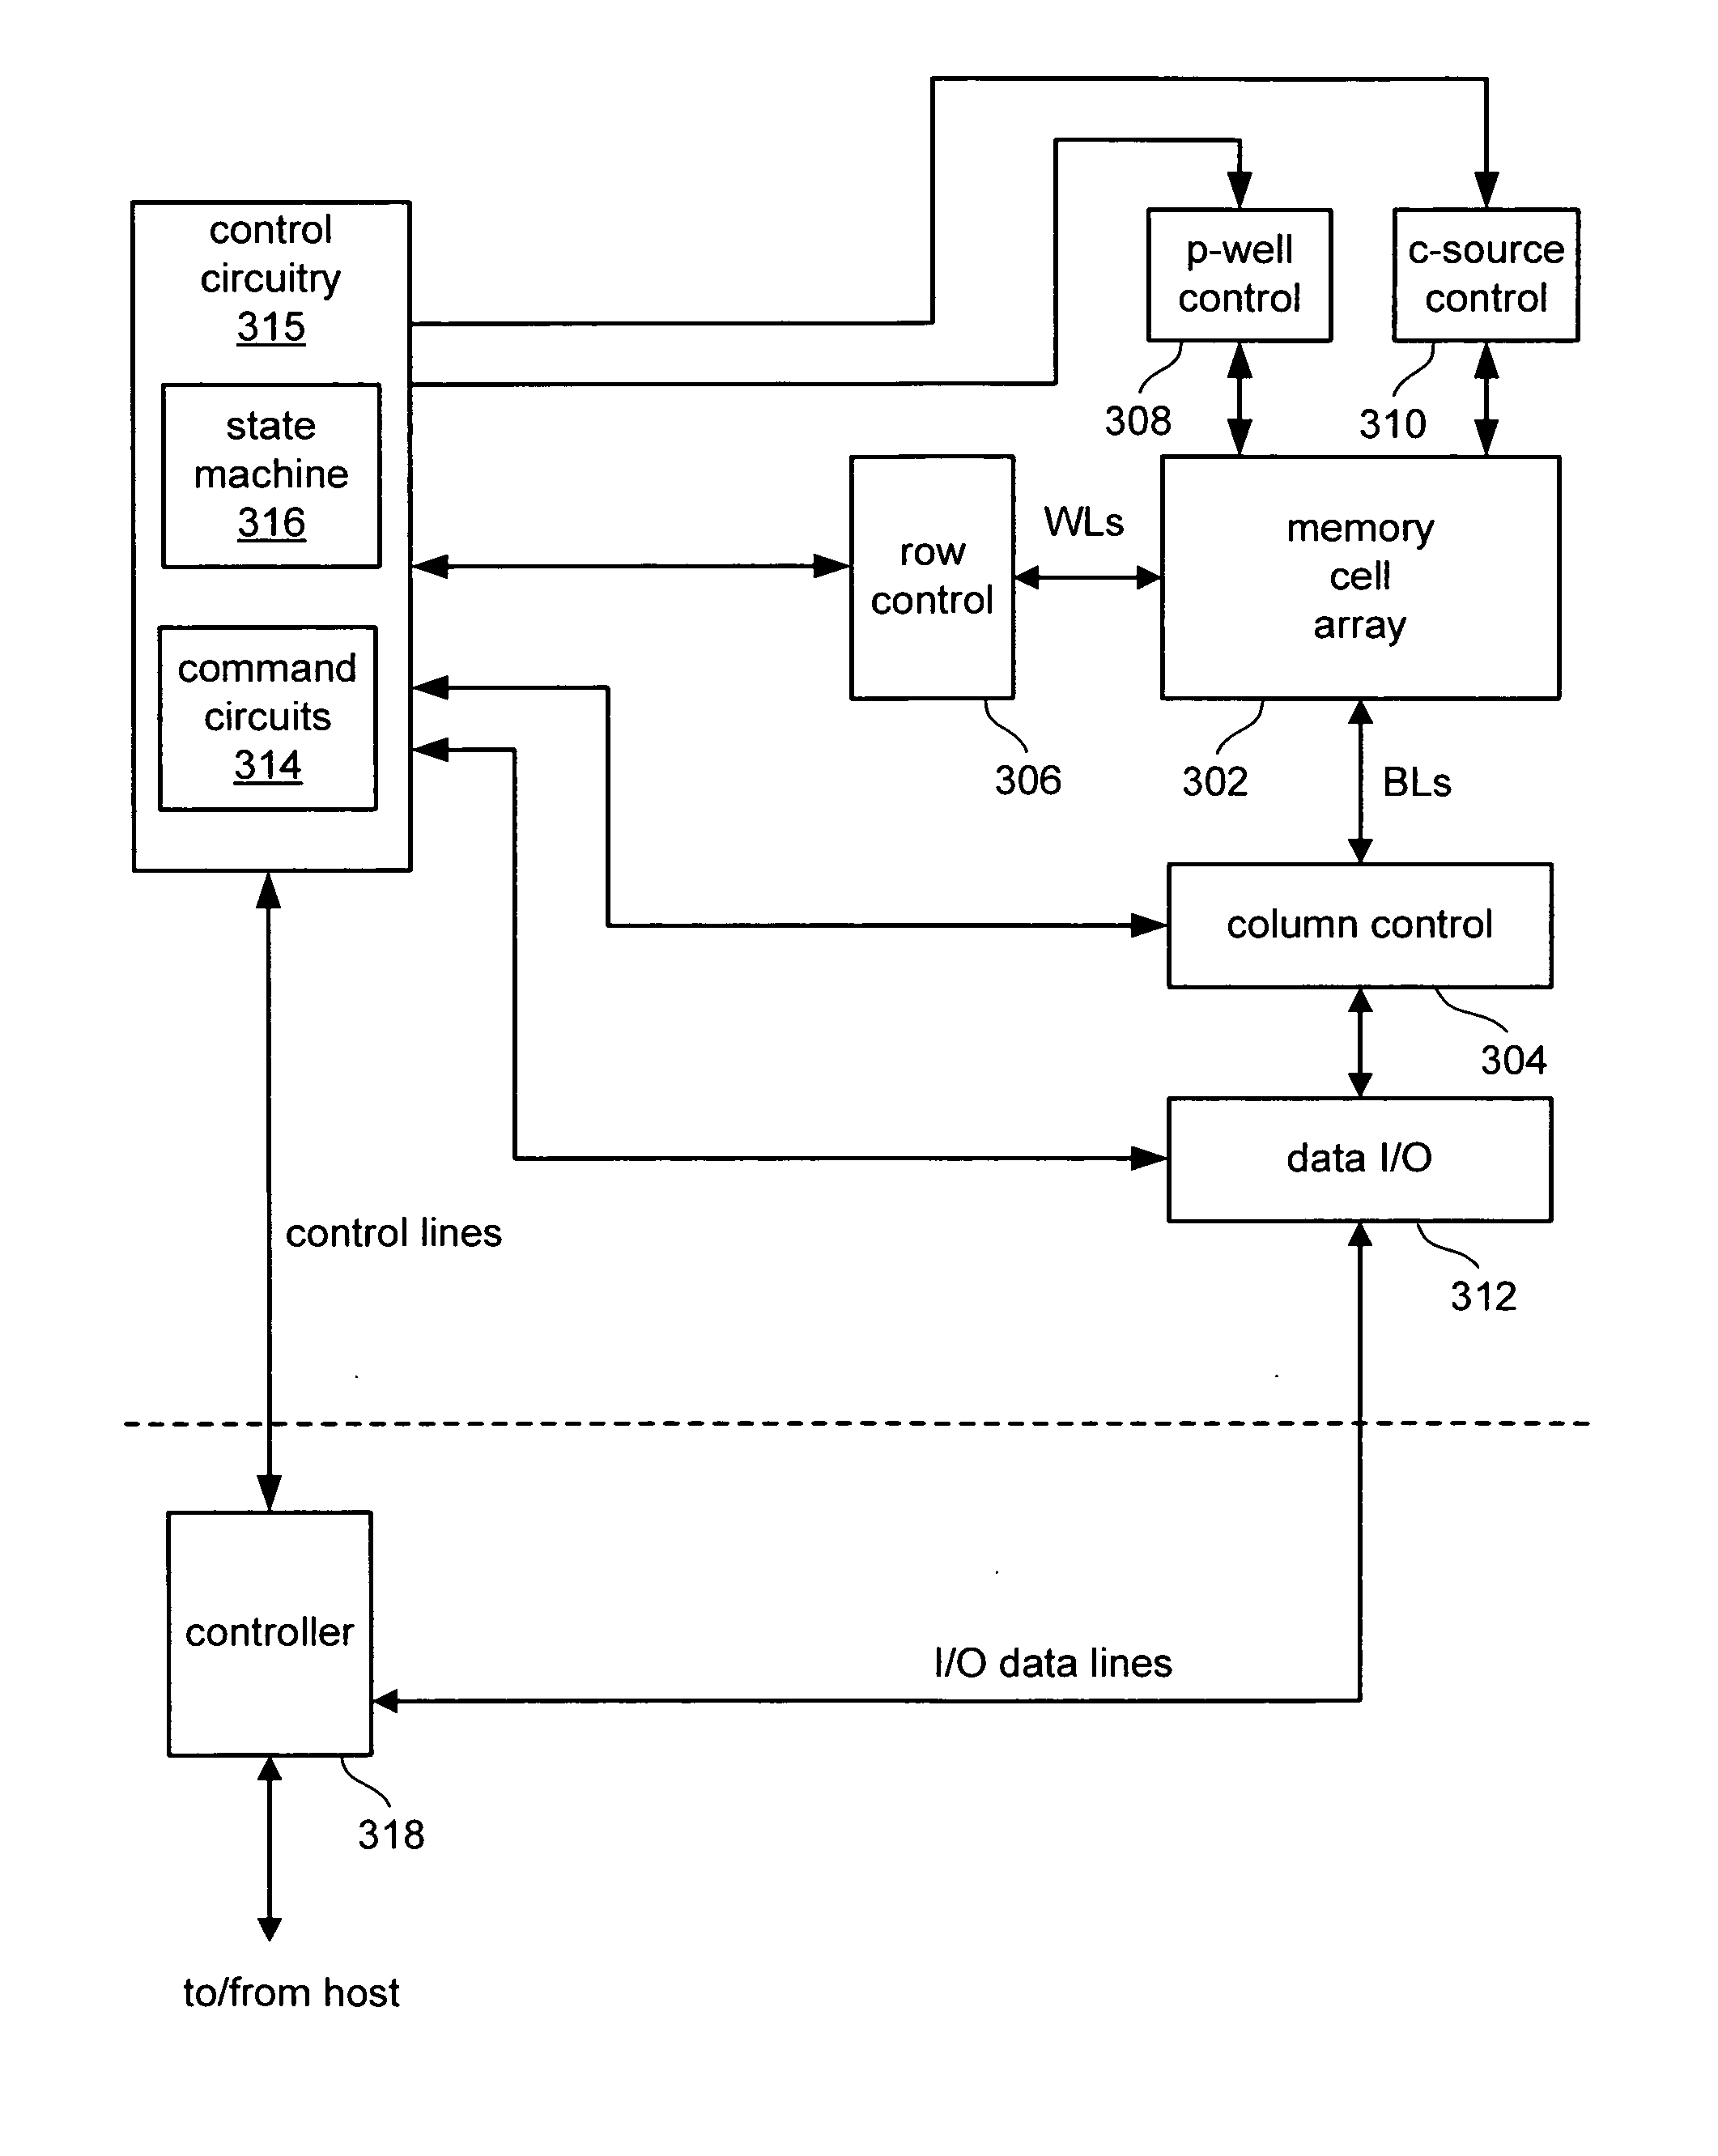 Method for programming non-volatile memory with reduced program disturb using modified pass voltages